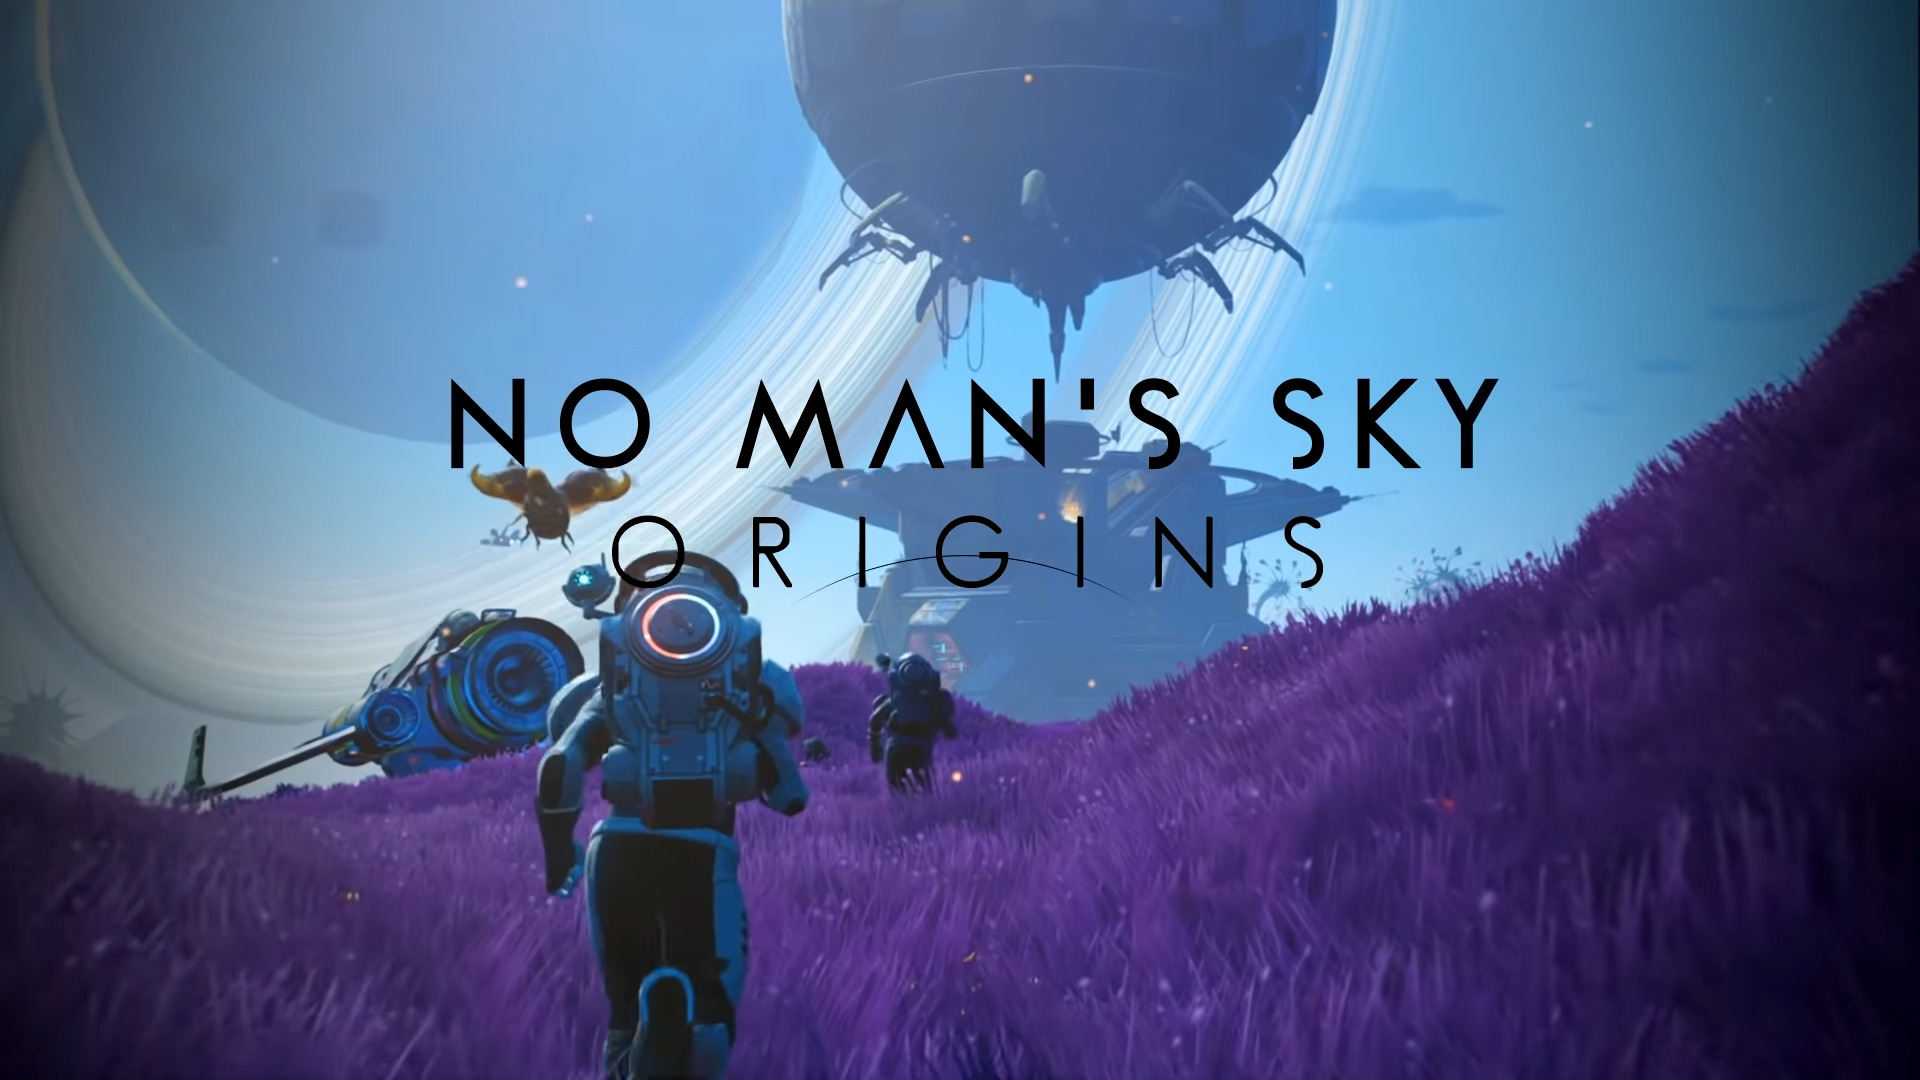 No Man’s Sky Origins Update 3.0 Will Offer A ‘Dramatic’ Expansion To The Universe